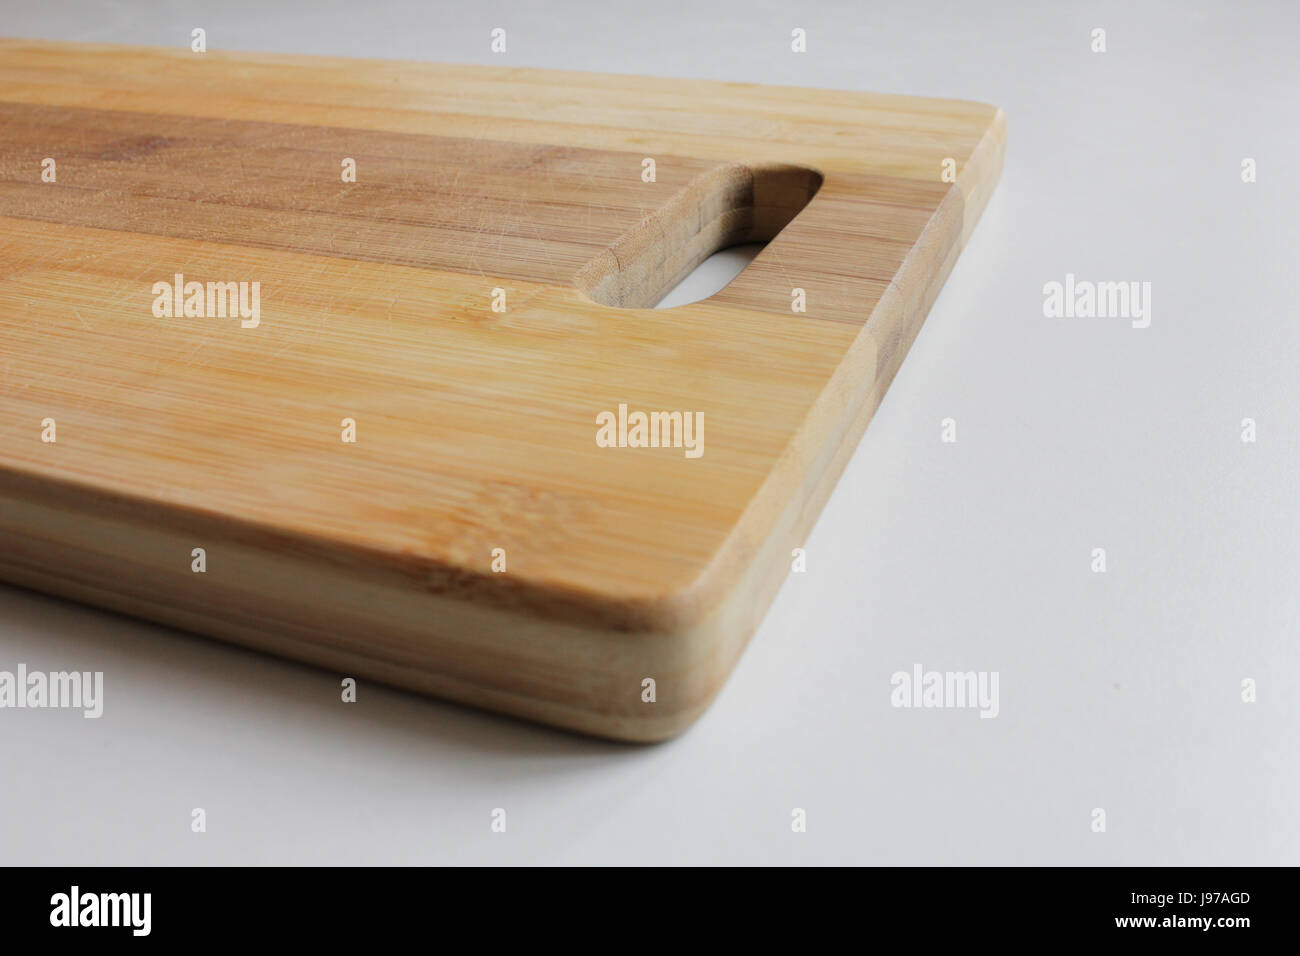 wooden board Stock Photo